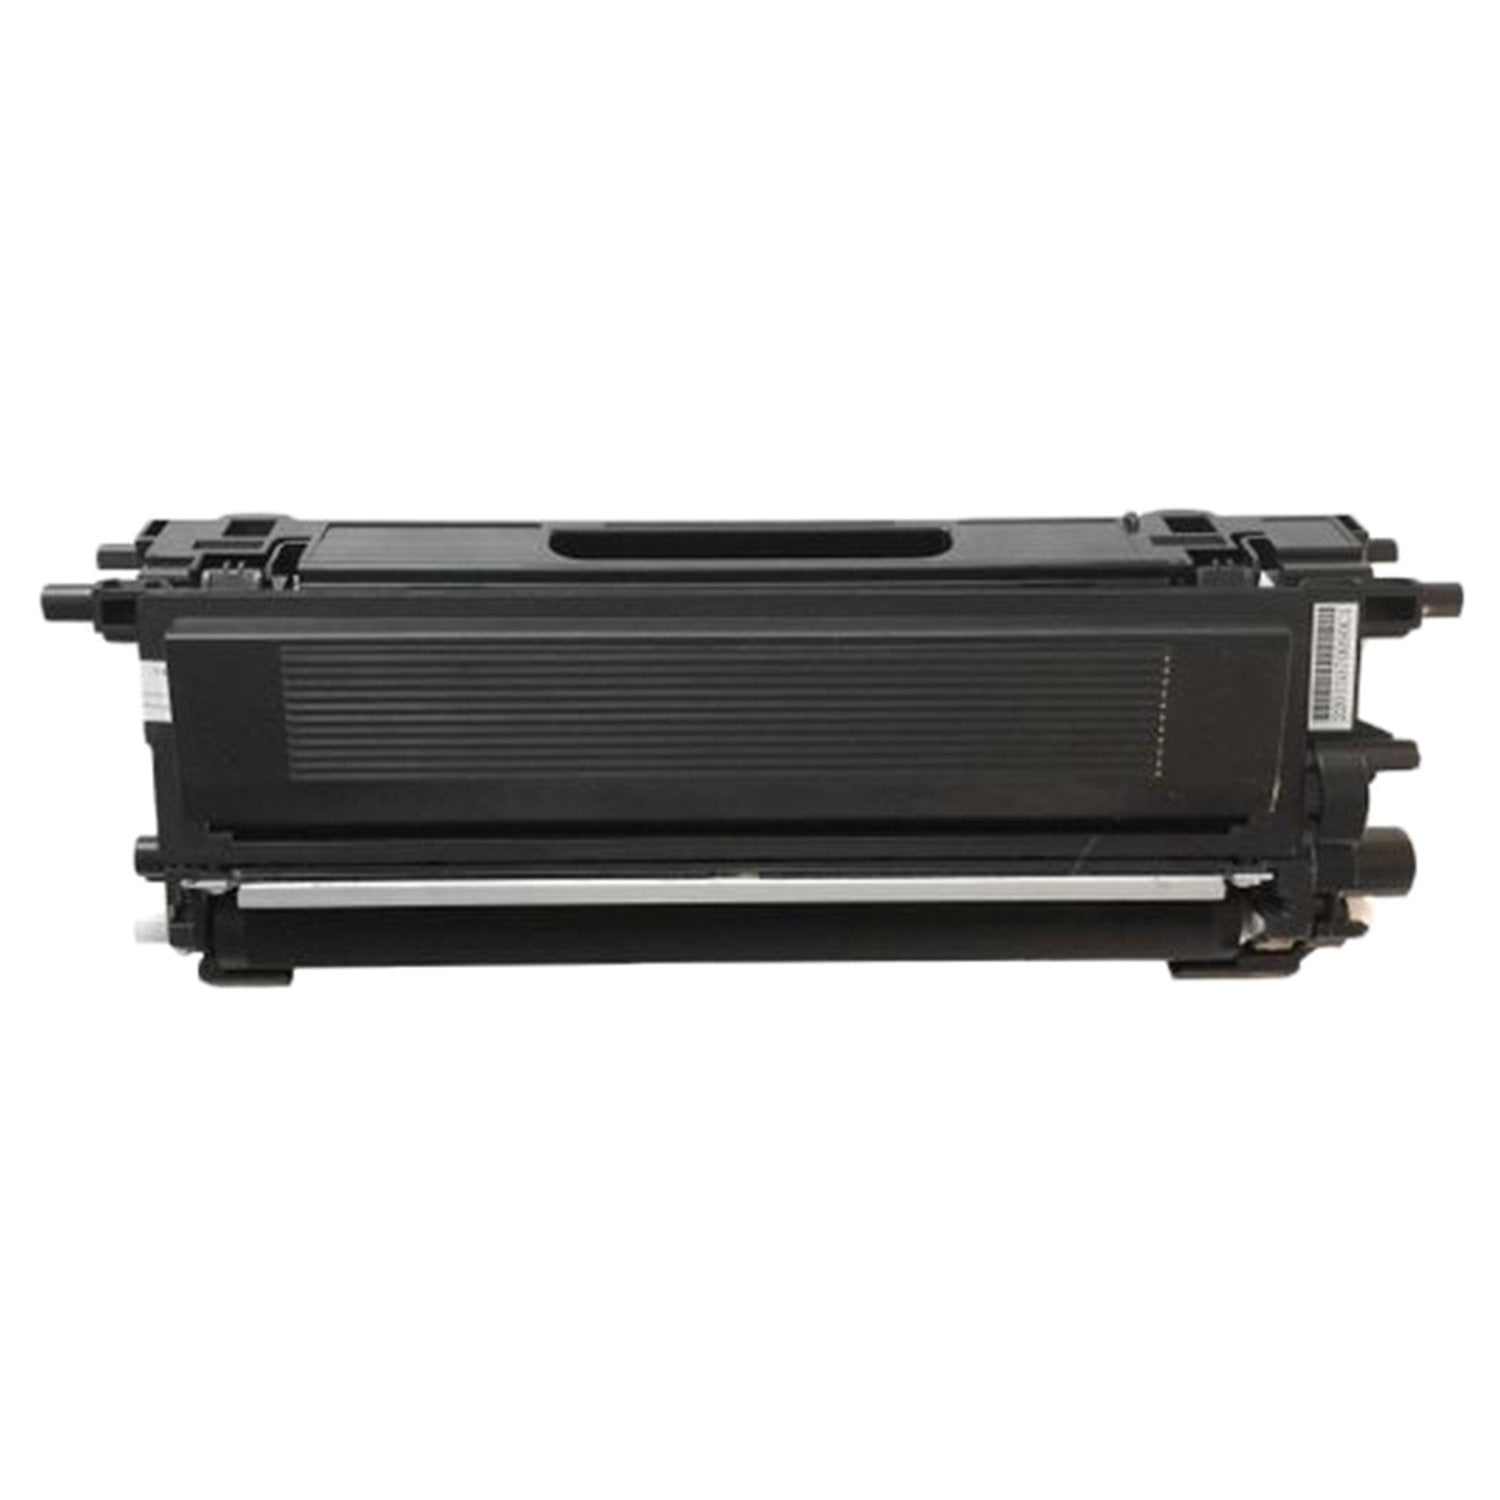 Absolute Toner Compatible Brother TN115 High Yield Toner Cartridge Black | Absolute Toner Brother Toner Cartridges